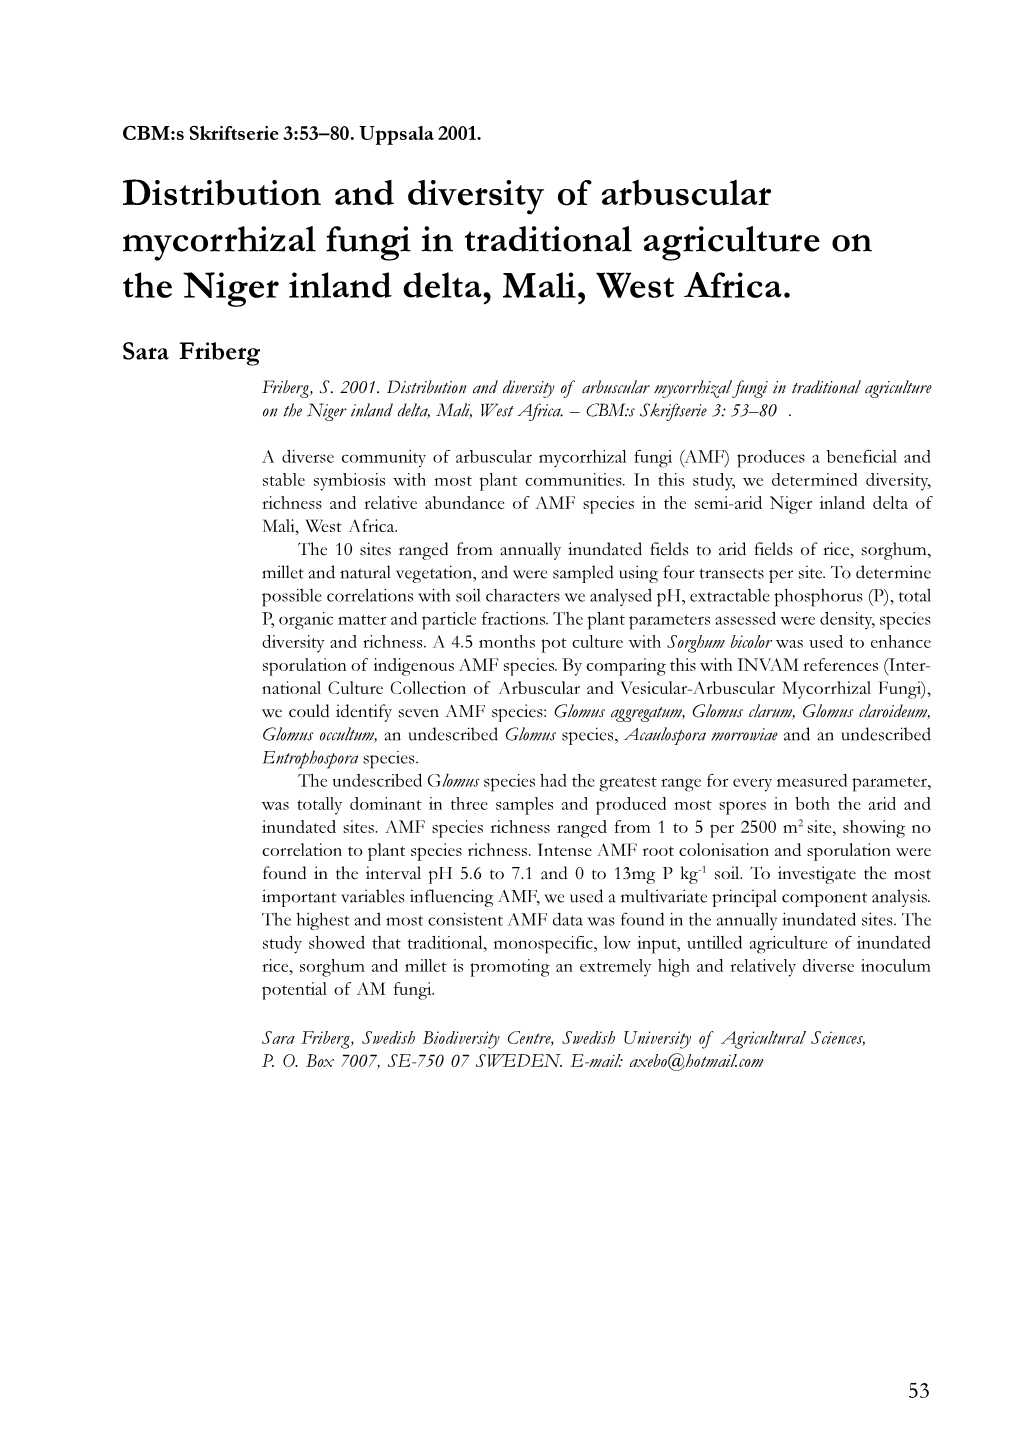 Distribution and Diversity of Arbuscular Mycorrhizal Fungi in Traditional Agriculture on the Niger